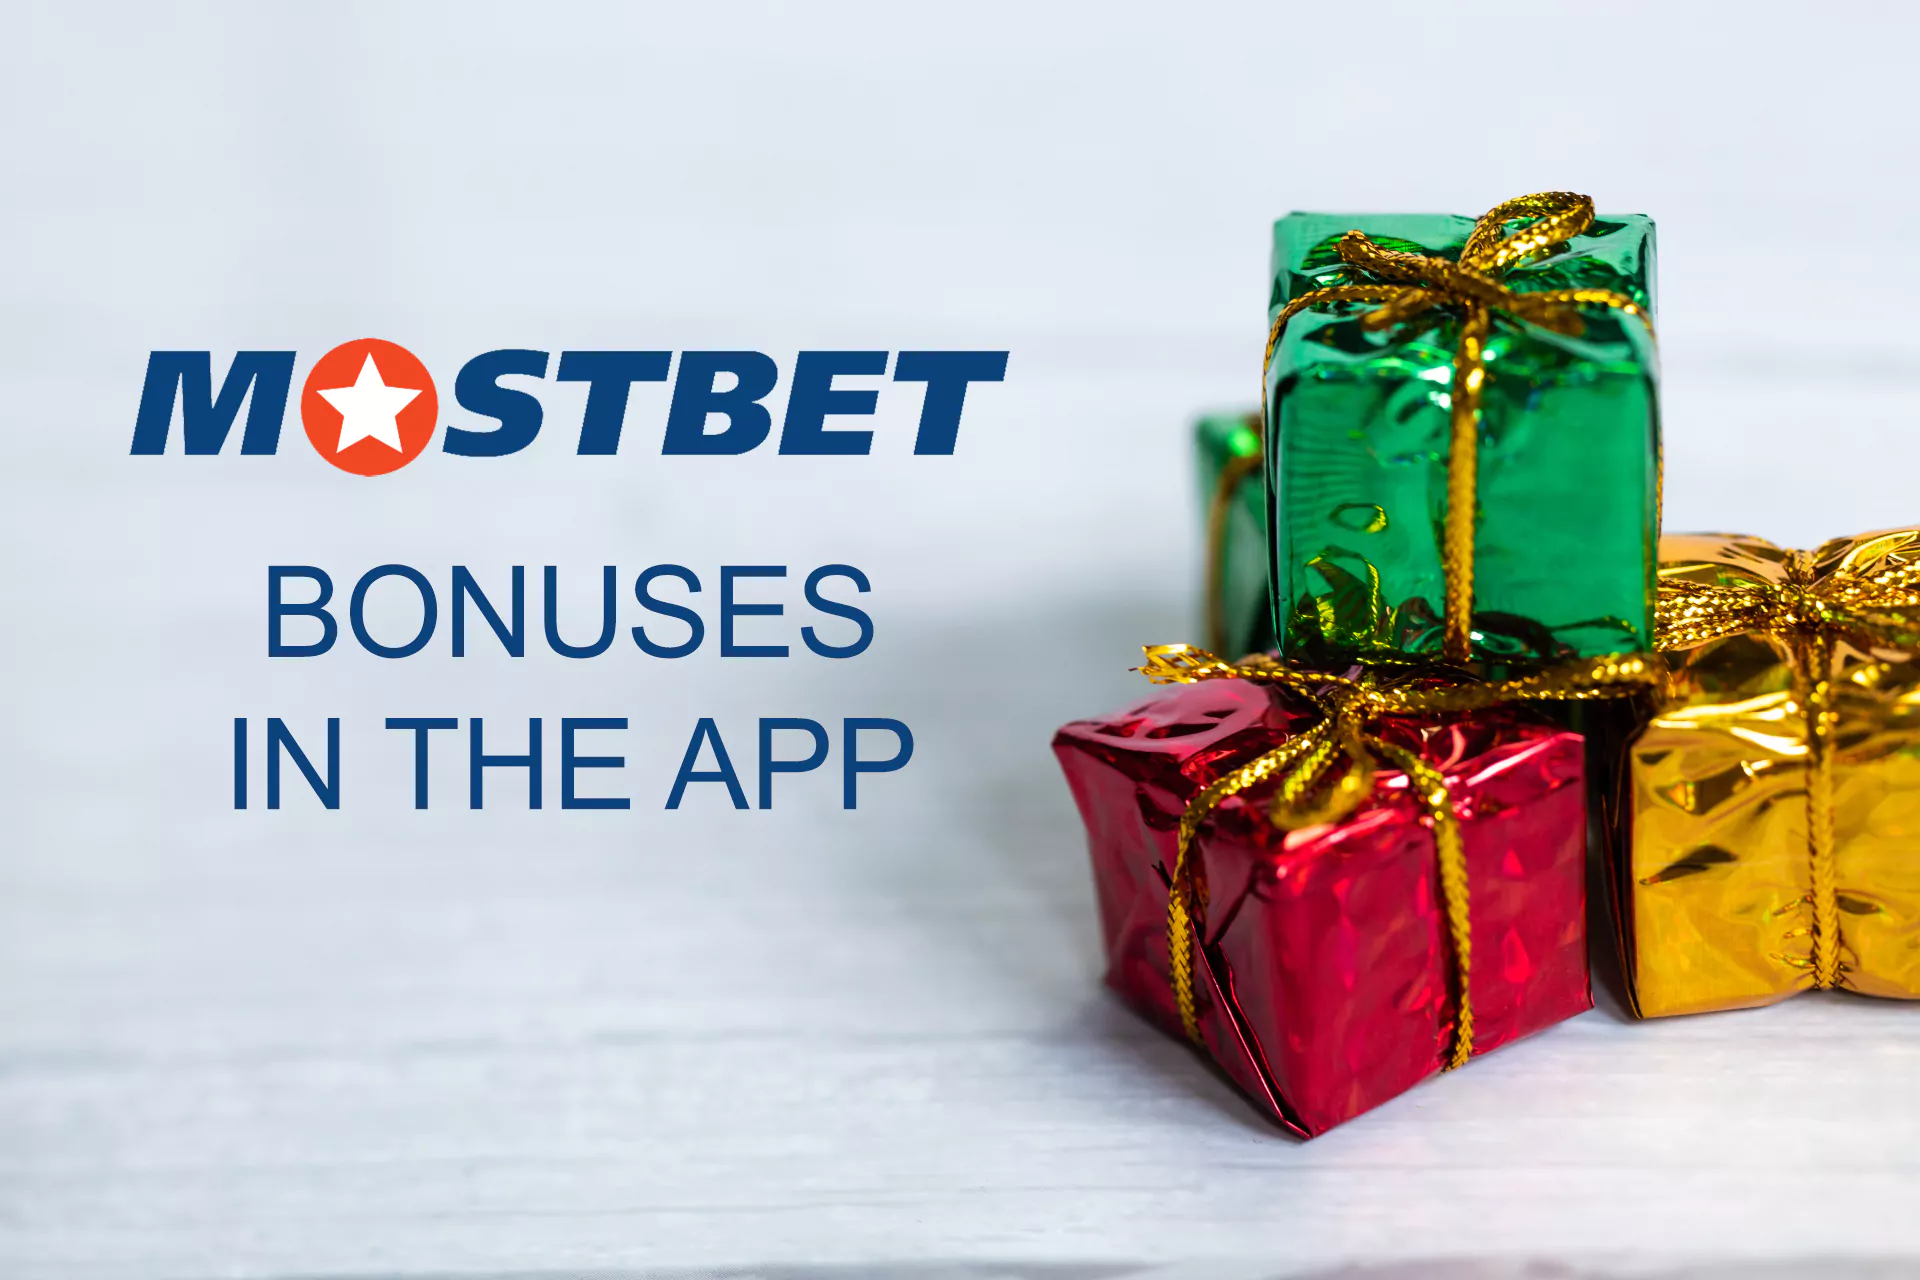 Users of the mobile app can receive some extra bonuses.